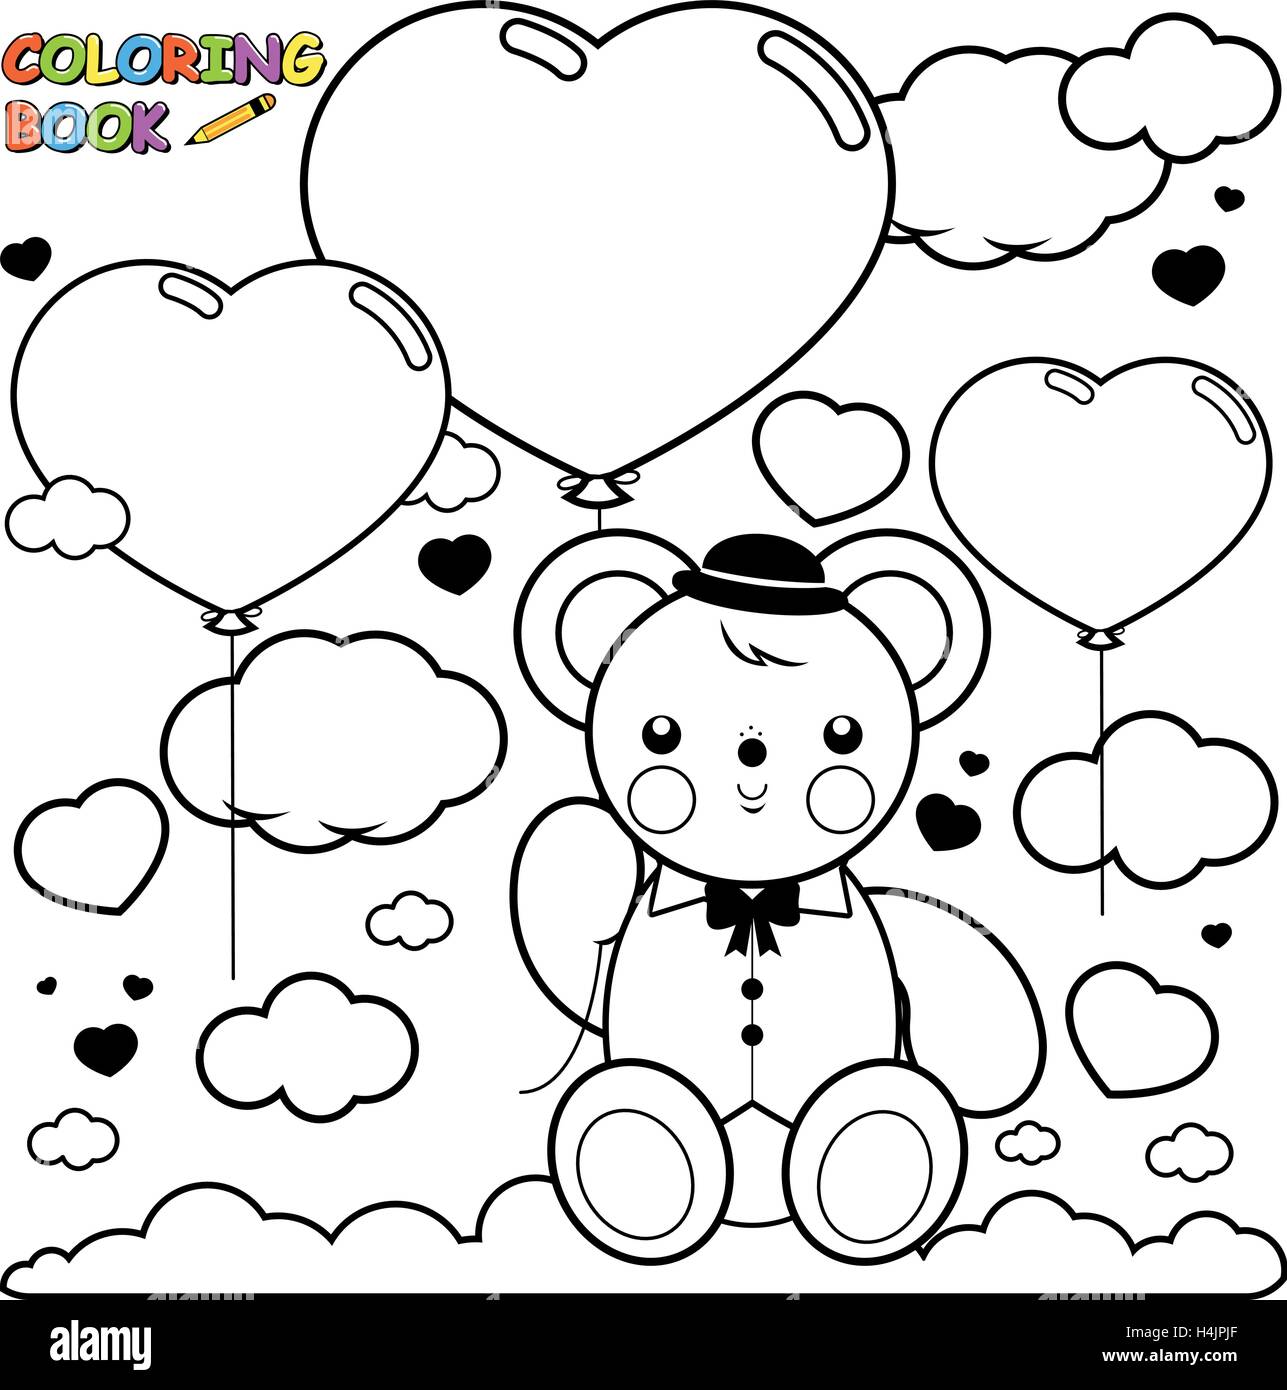 Teddy bear and heart balloons in the sky coloring book page stock vector image art